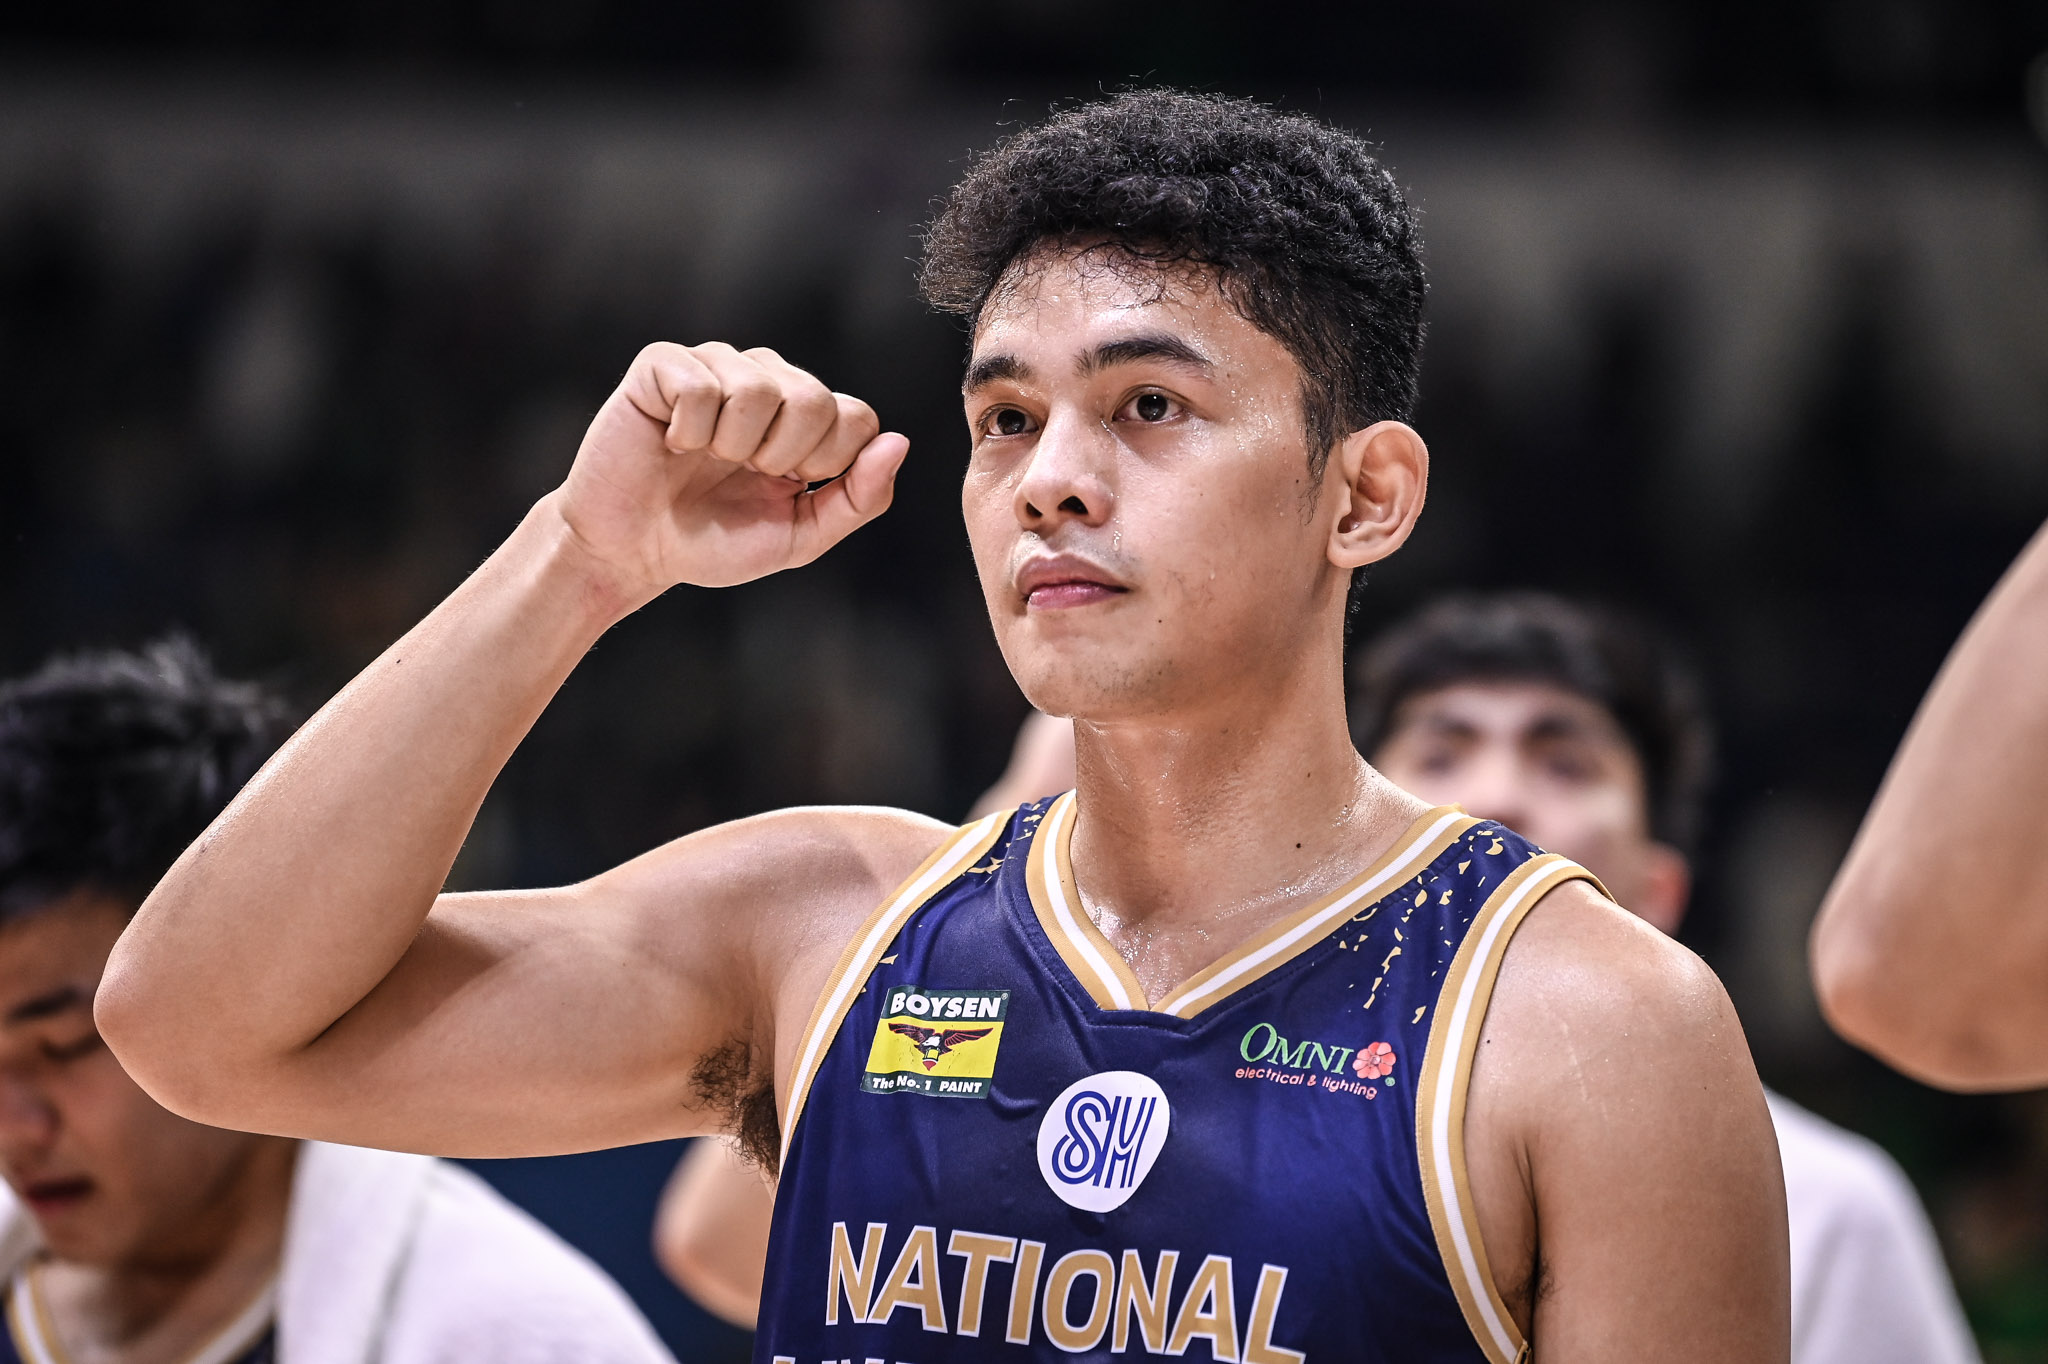 UAAP86-MBB-Jm-Galinato-3334 UAAP 86 MBB: La Salle crushes NU in lopsided semis, forges Finals date with UP Basketball DLSU News NU UAAP  - philippine sports news